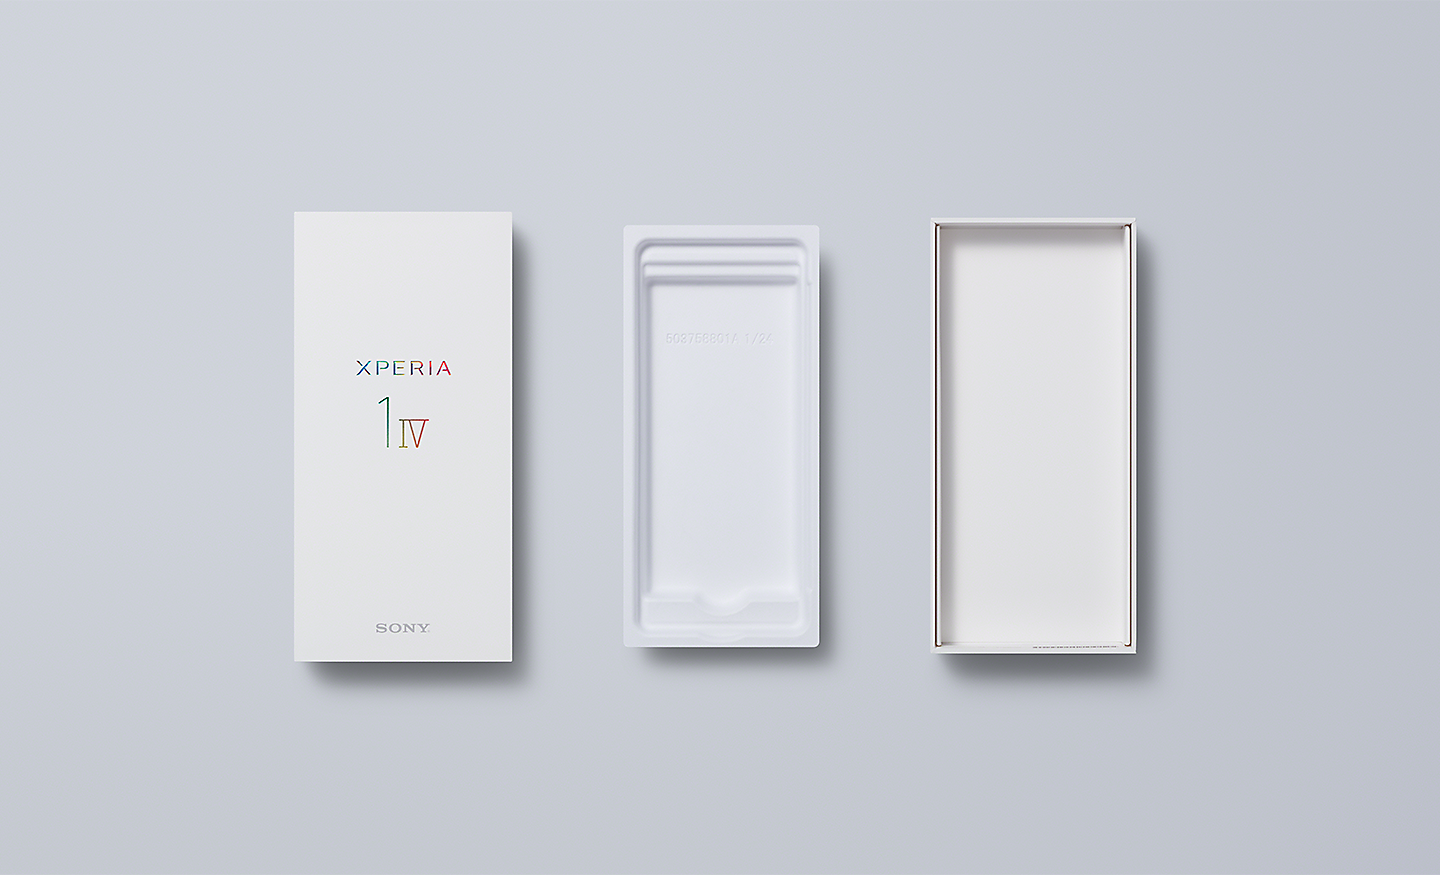 Packaging for the Xperia 1 IV